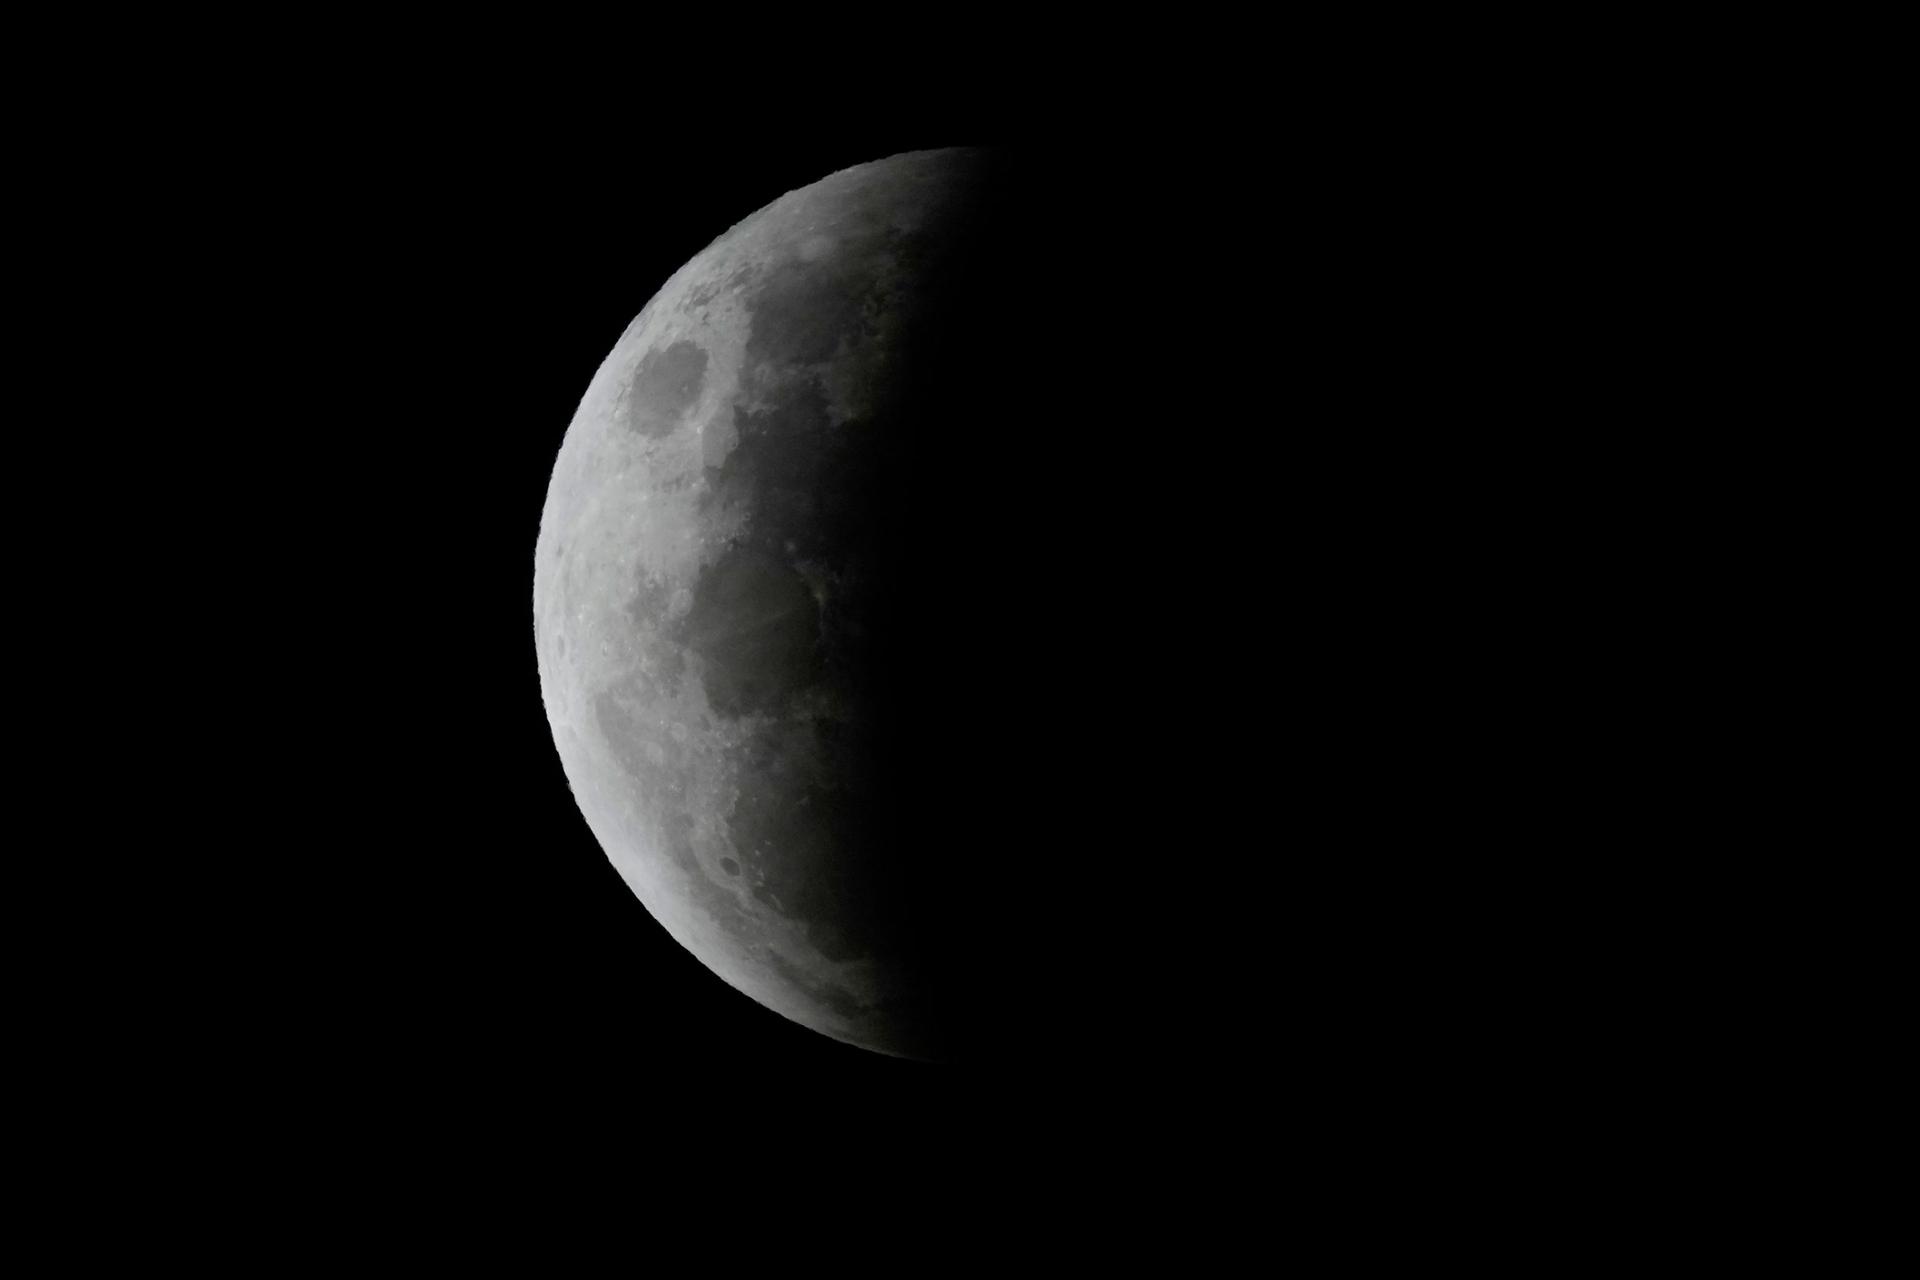 The total lunar eclipse continues with a shadow on about 75% of the moon.